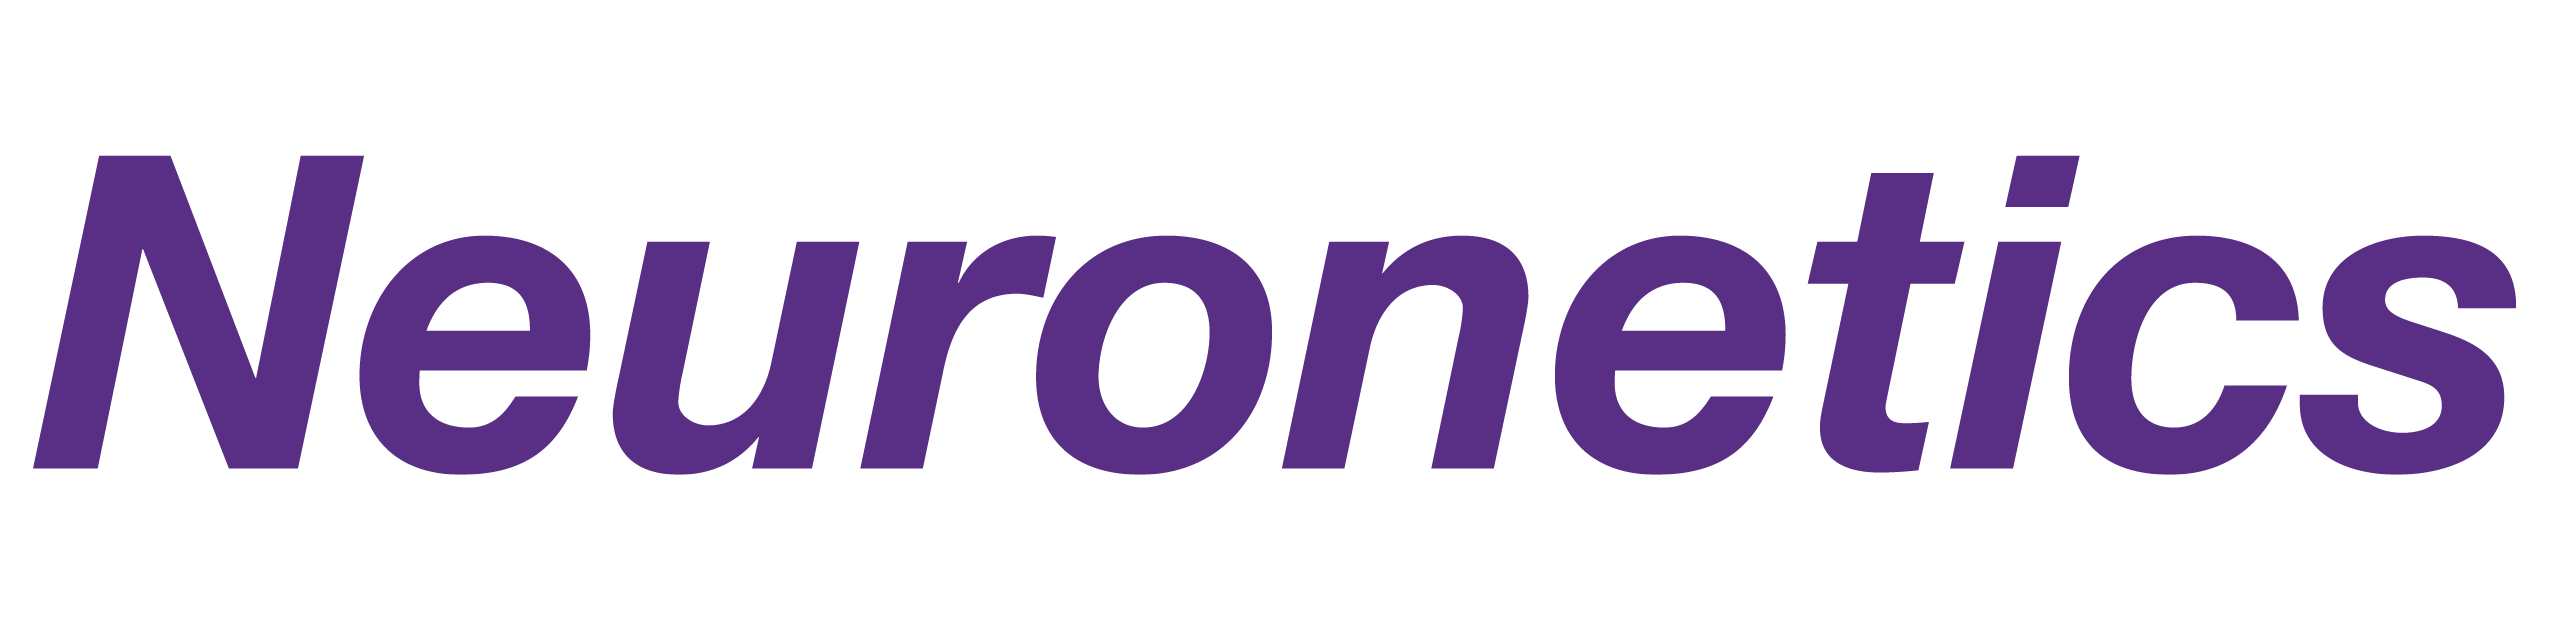 Neuronetics Announces Expanded TMS Therapy Access Through Aetna® Health Plans